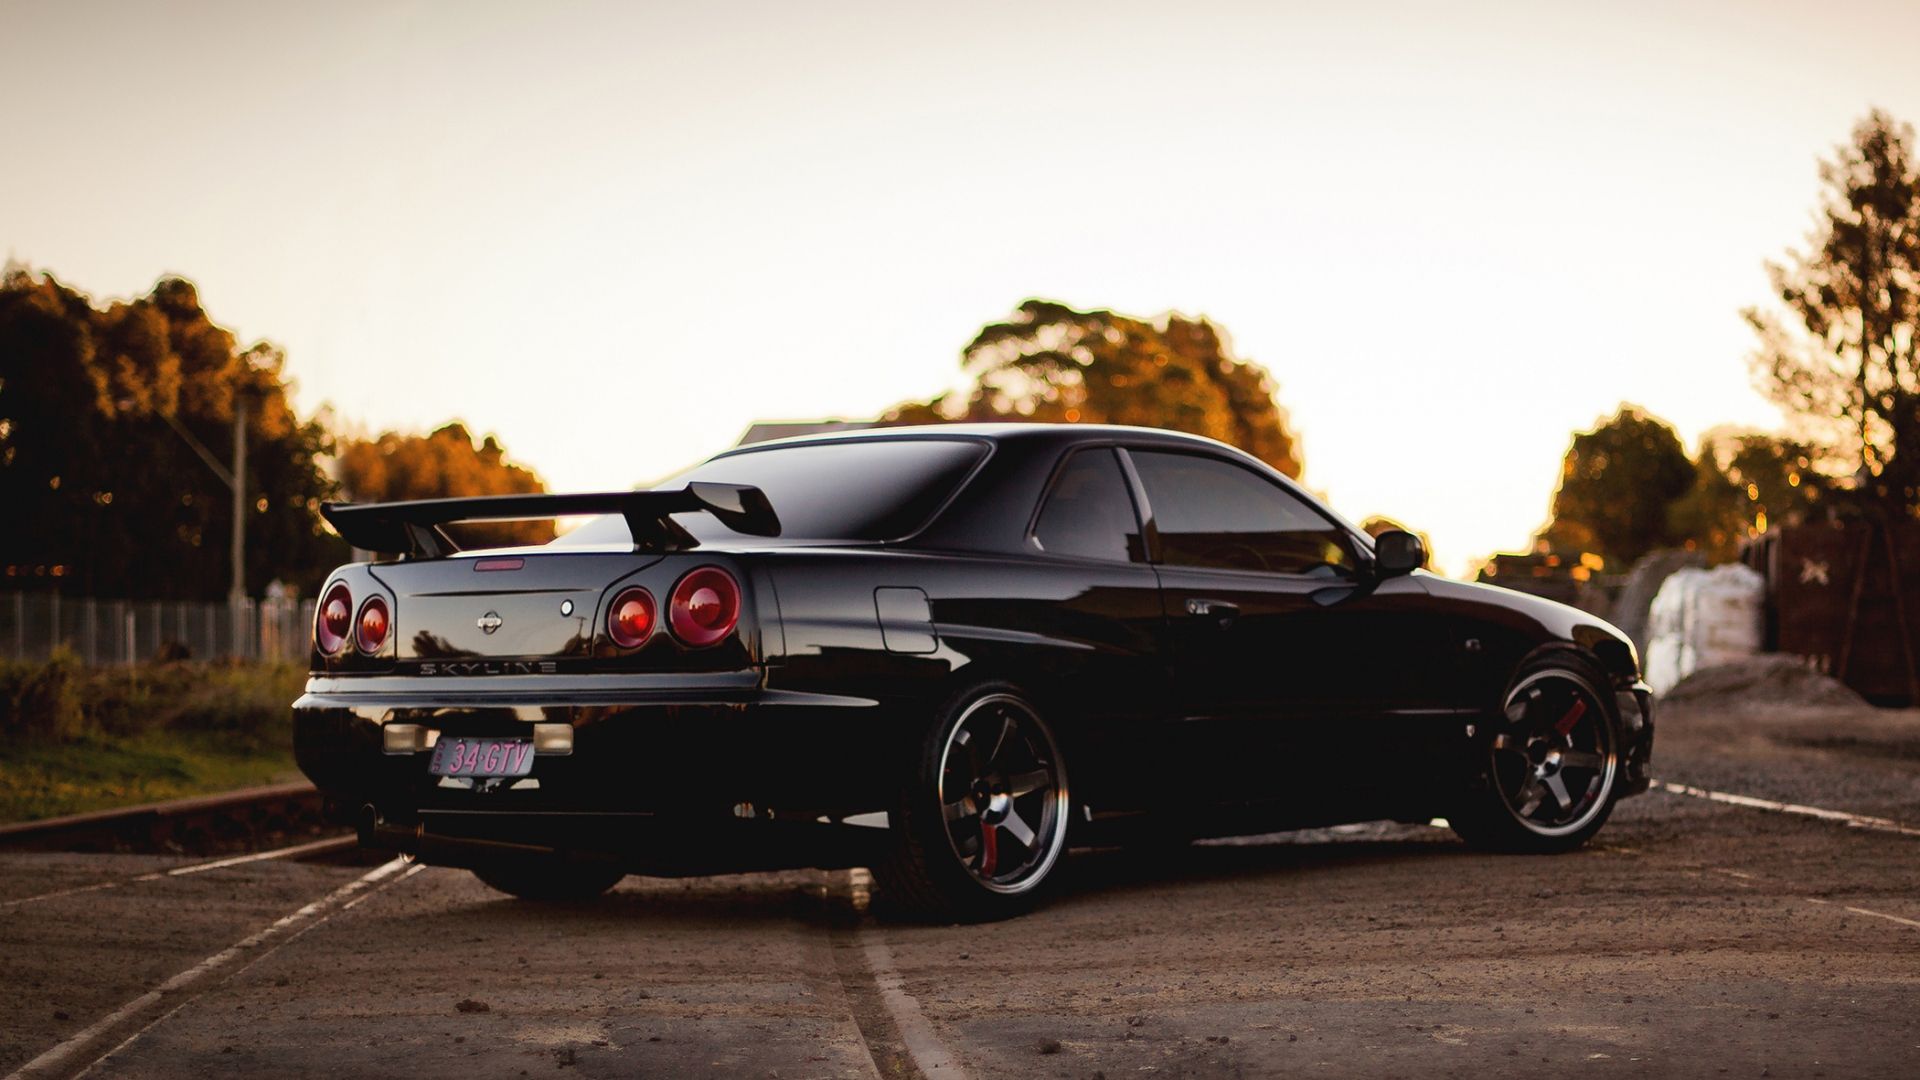 Download 1920x1080 HD Wallpaper nissan skyline coupe blurry